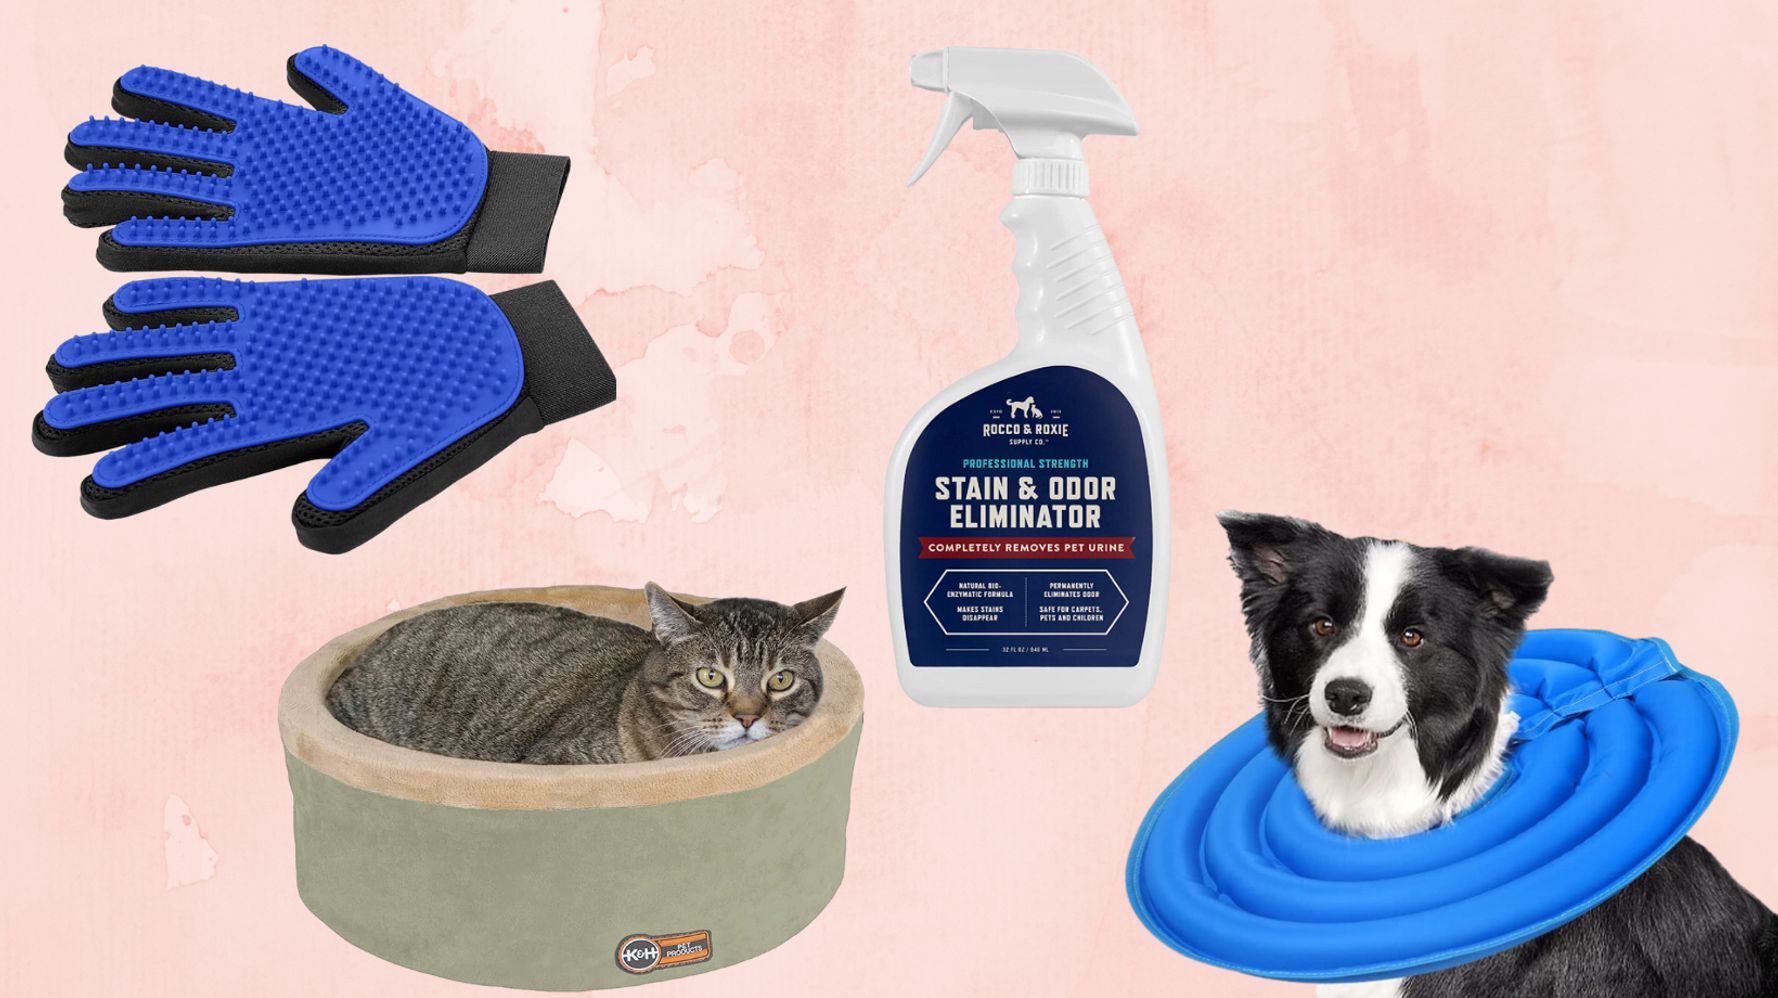 The Best Products For Senior Pets, According To Reviews